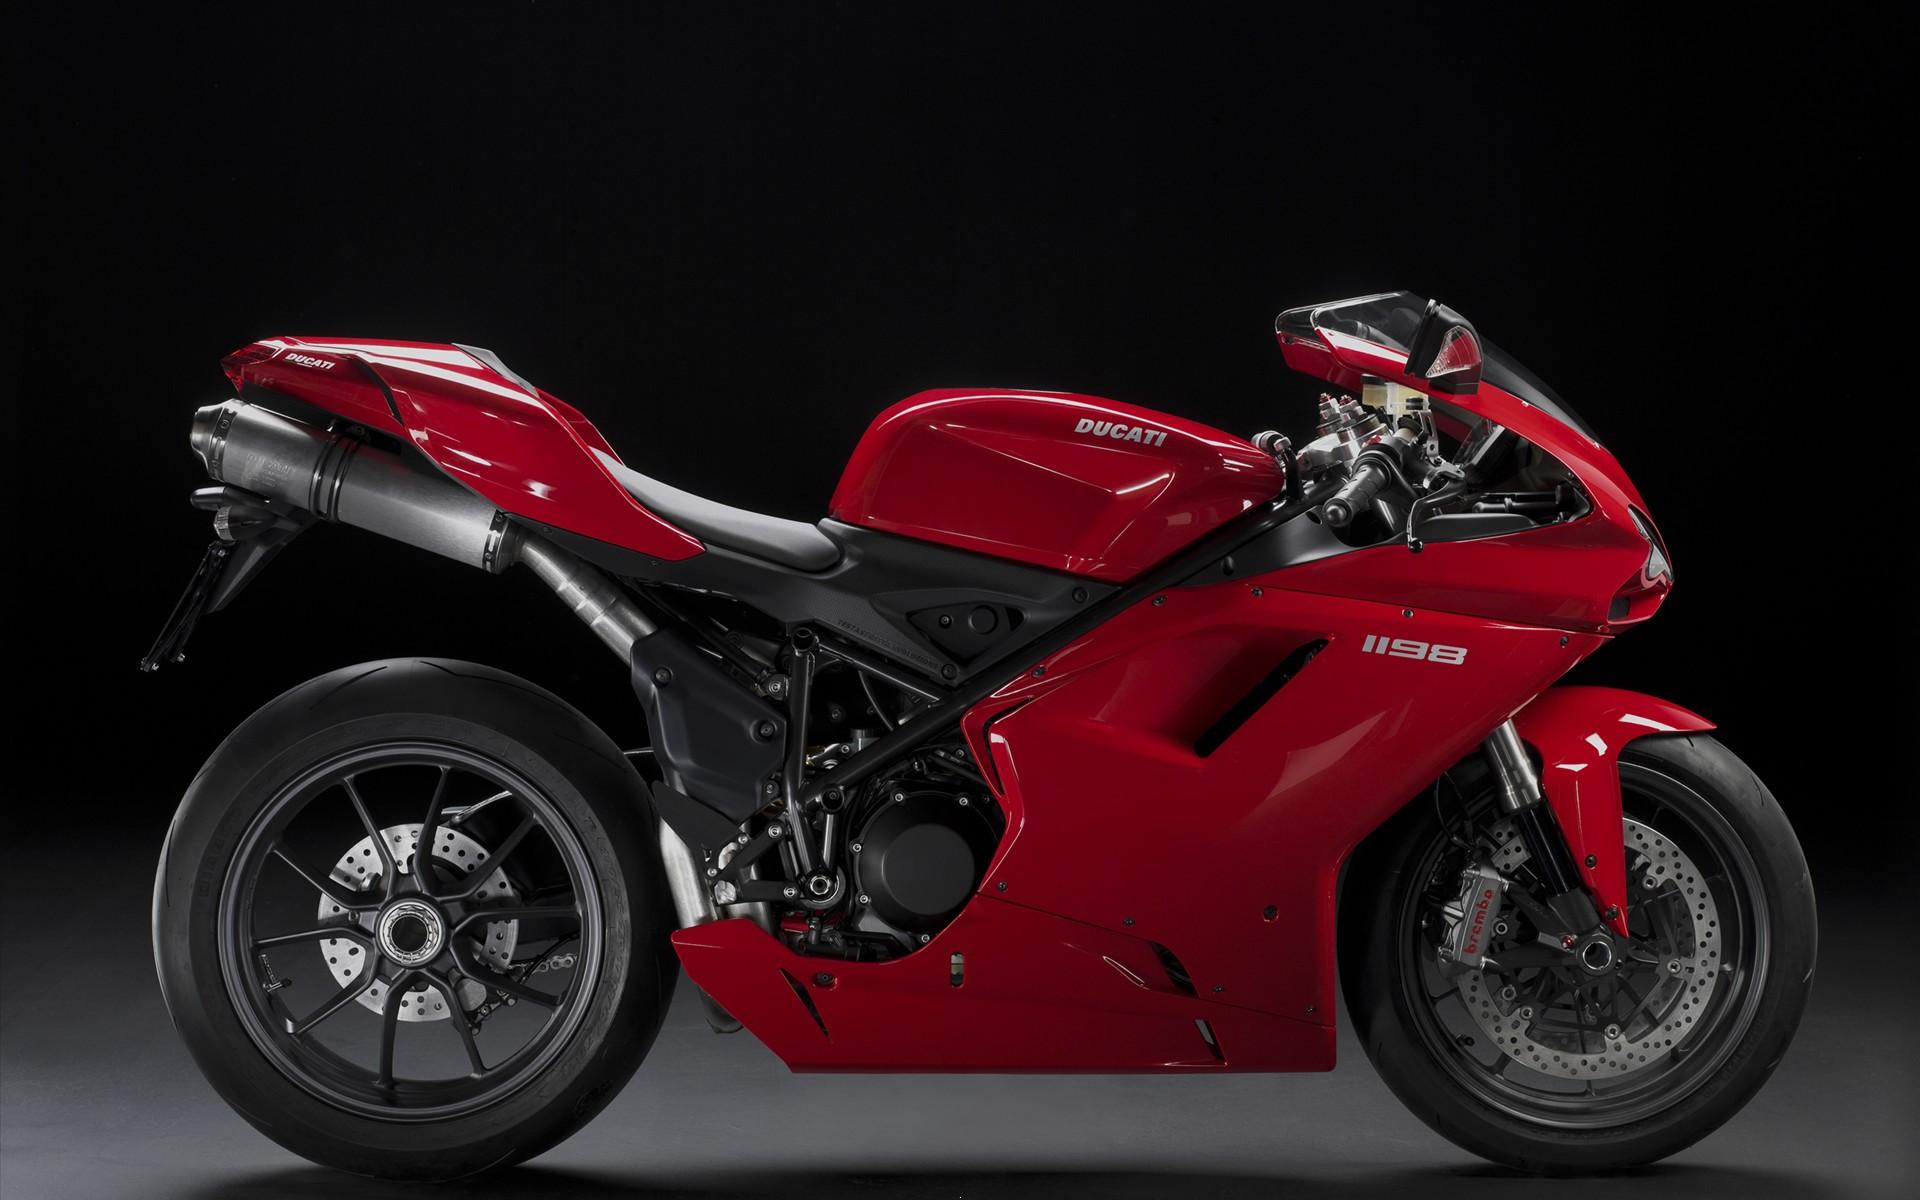 Download Ducati 1198 super bike - Bikes wallpaper for your mobile cell phone